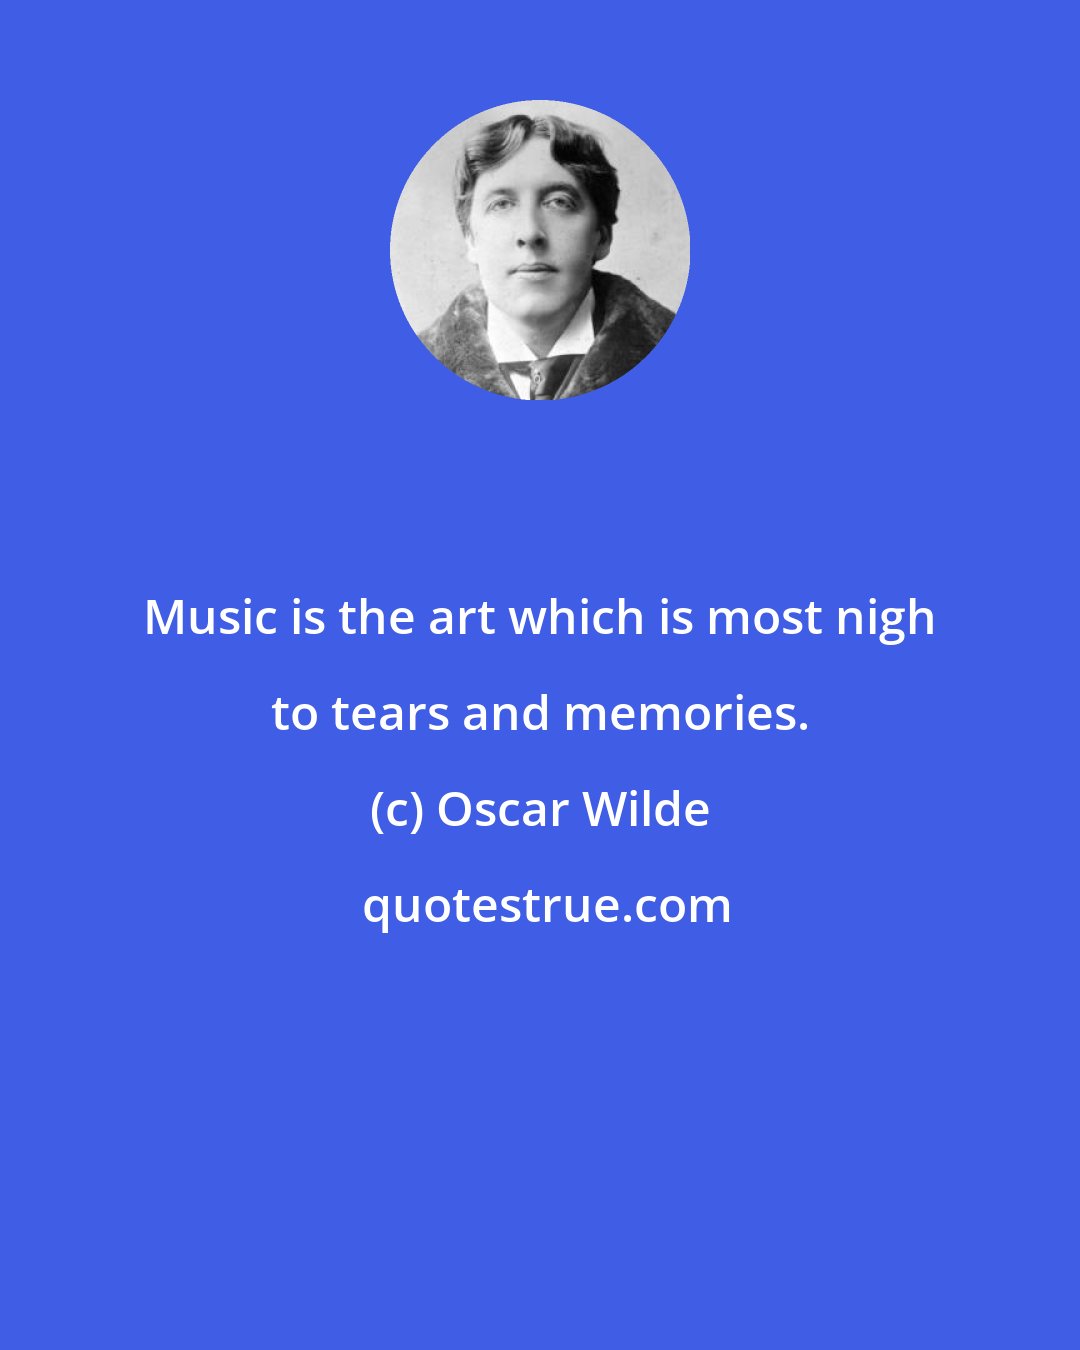 Oscar Wilde: Music is the art which is most nigh to tears and memories.